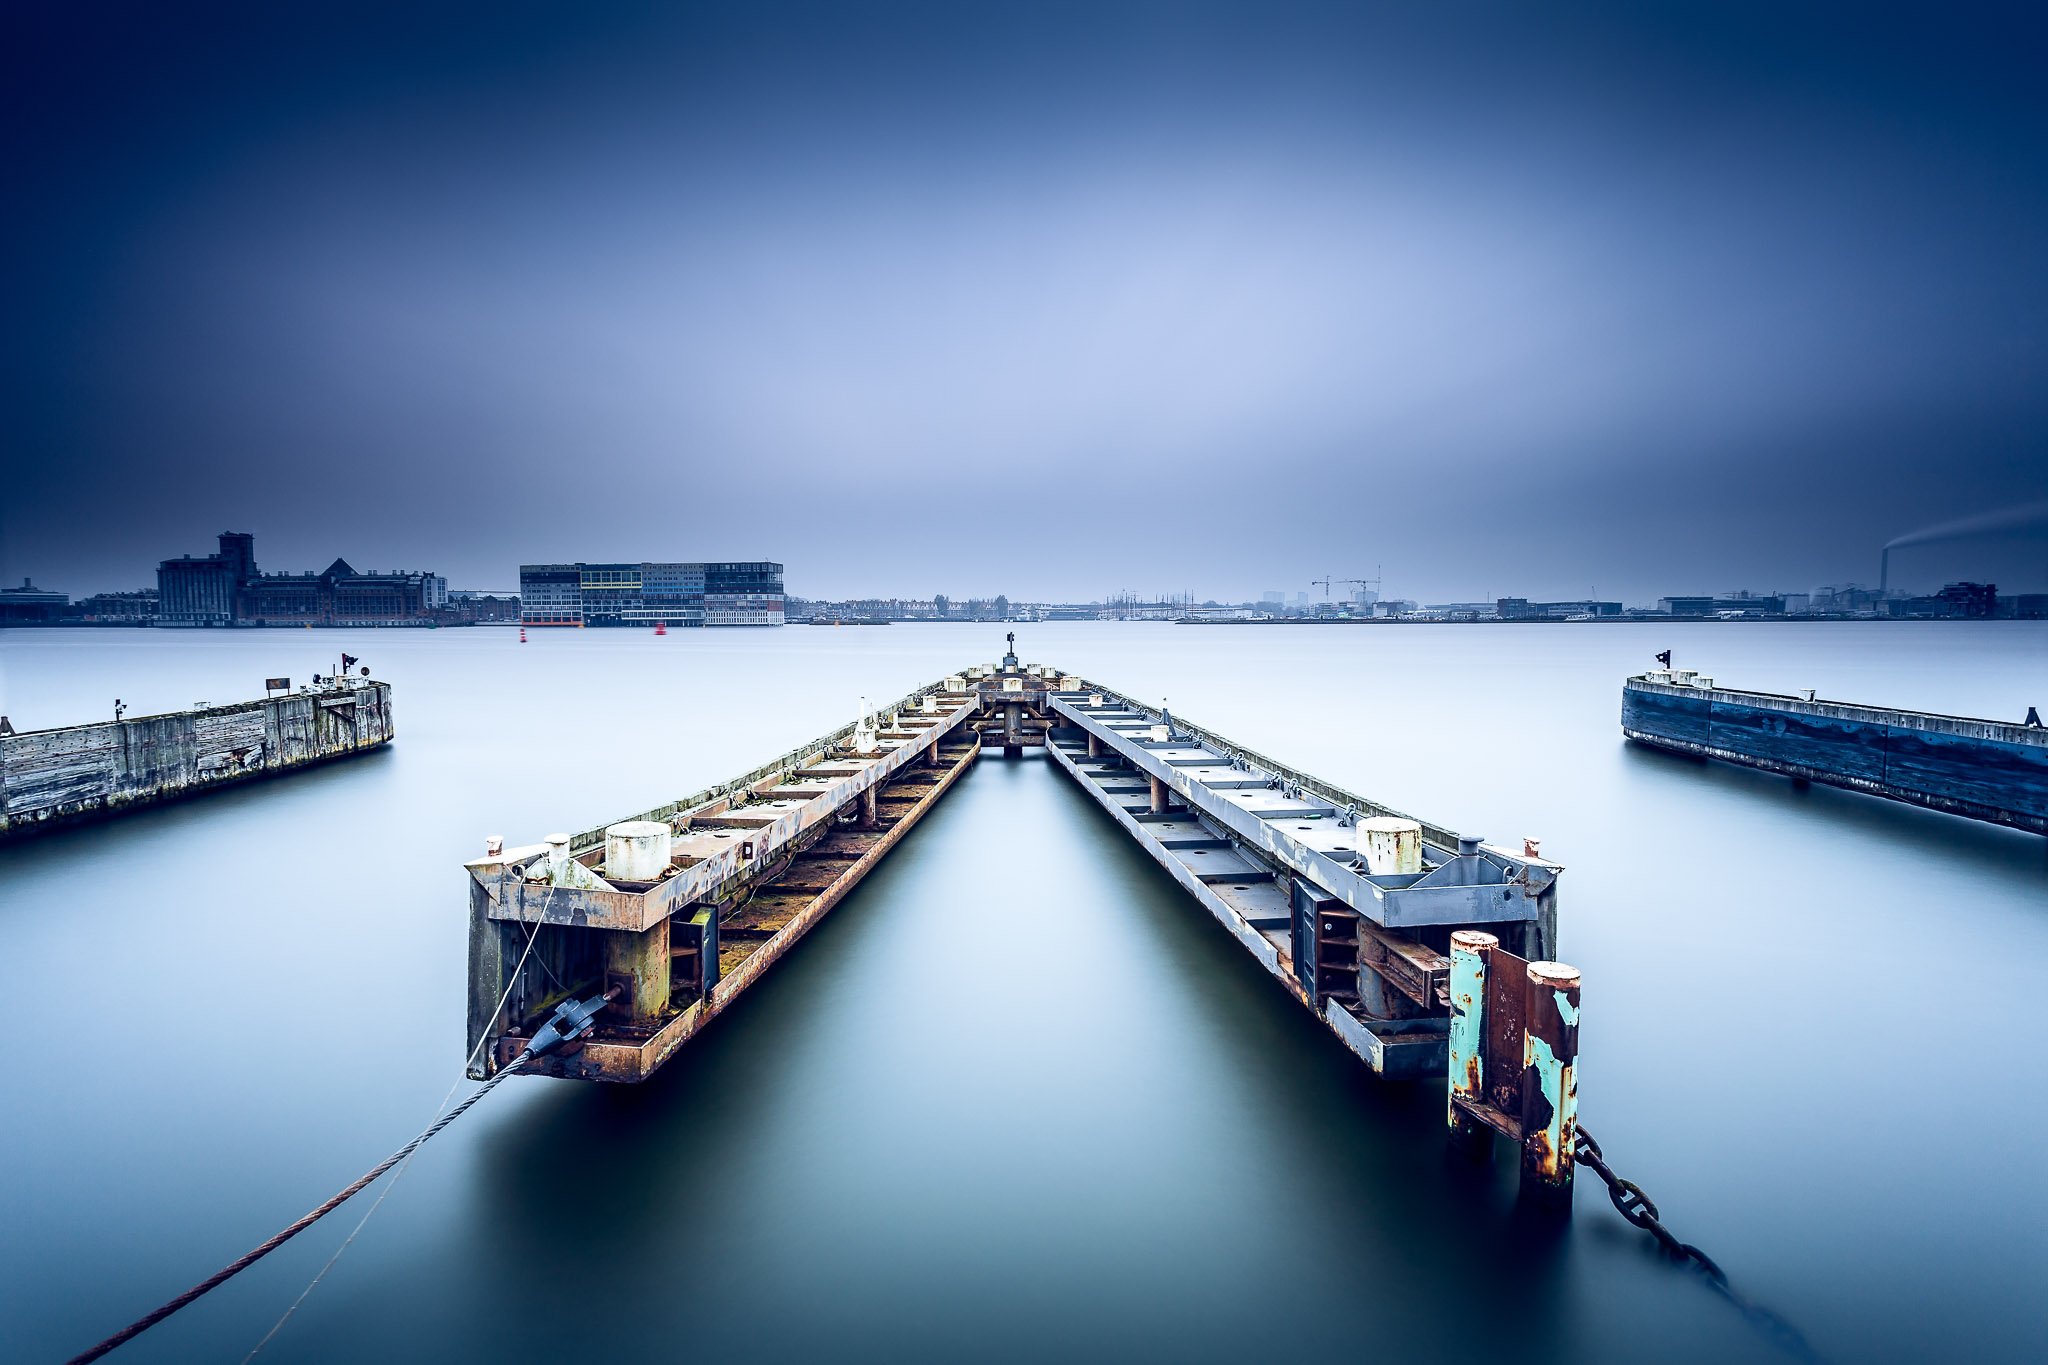 A long exposure image of a ferry doc in Amsterdam